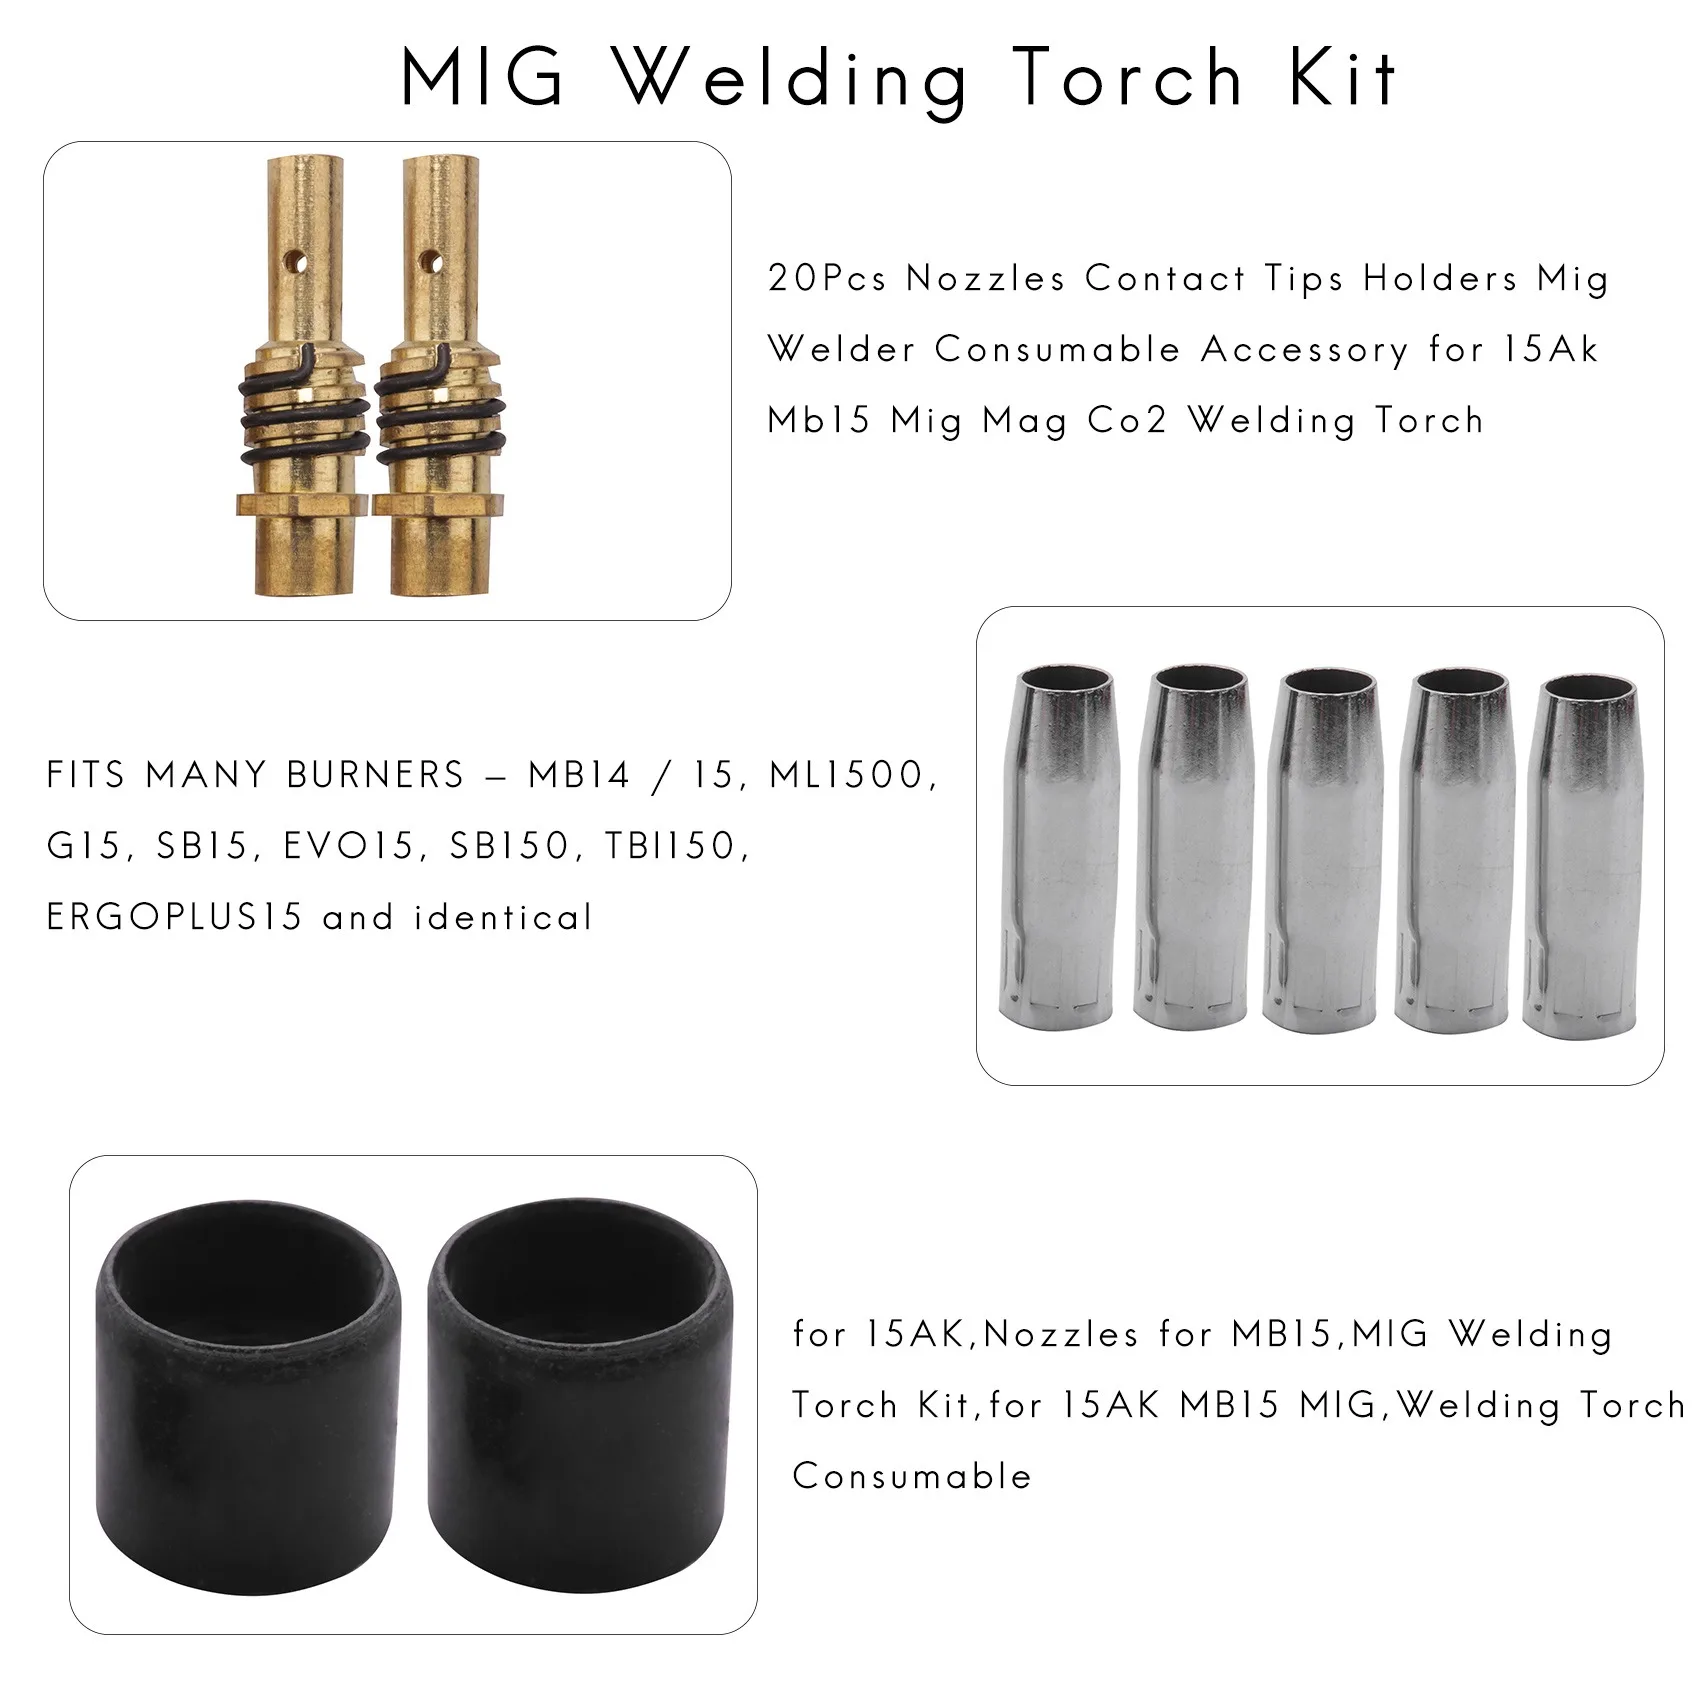 

20Pcs Nozzles Contact Tips Holders Mig Welder Consumable Accessory for 15Ak Mb15 Mig Mag Co2 Welding Torch